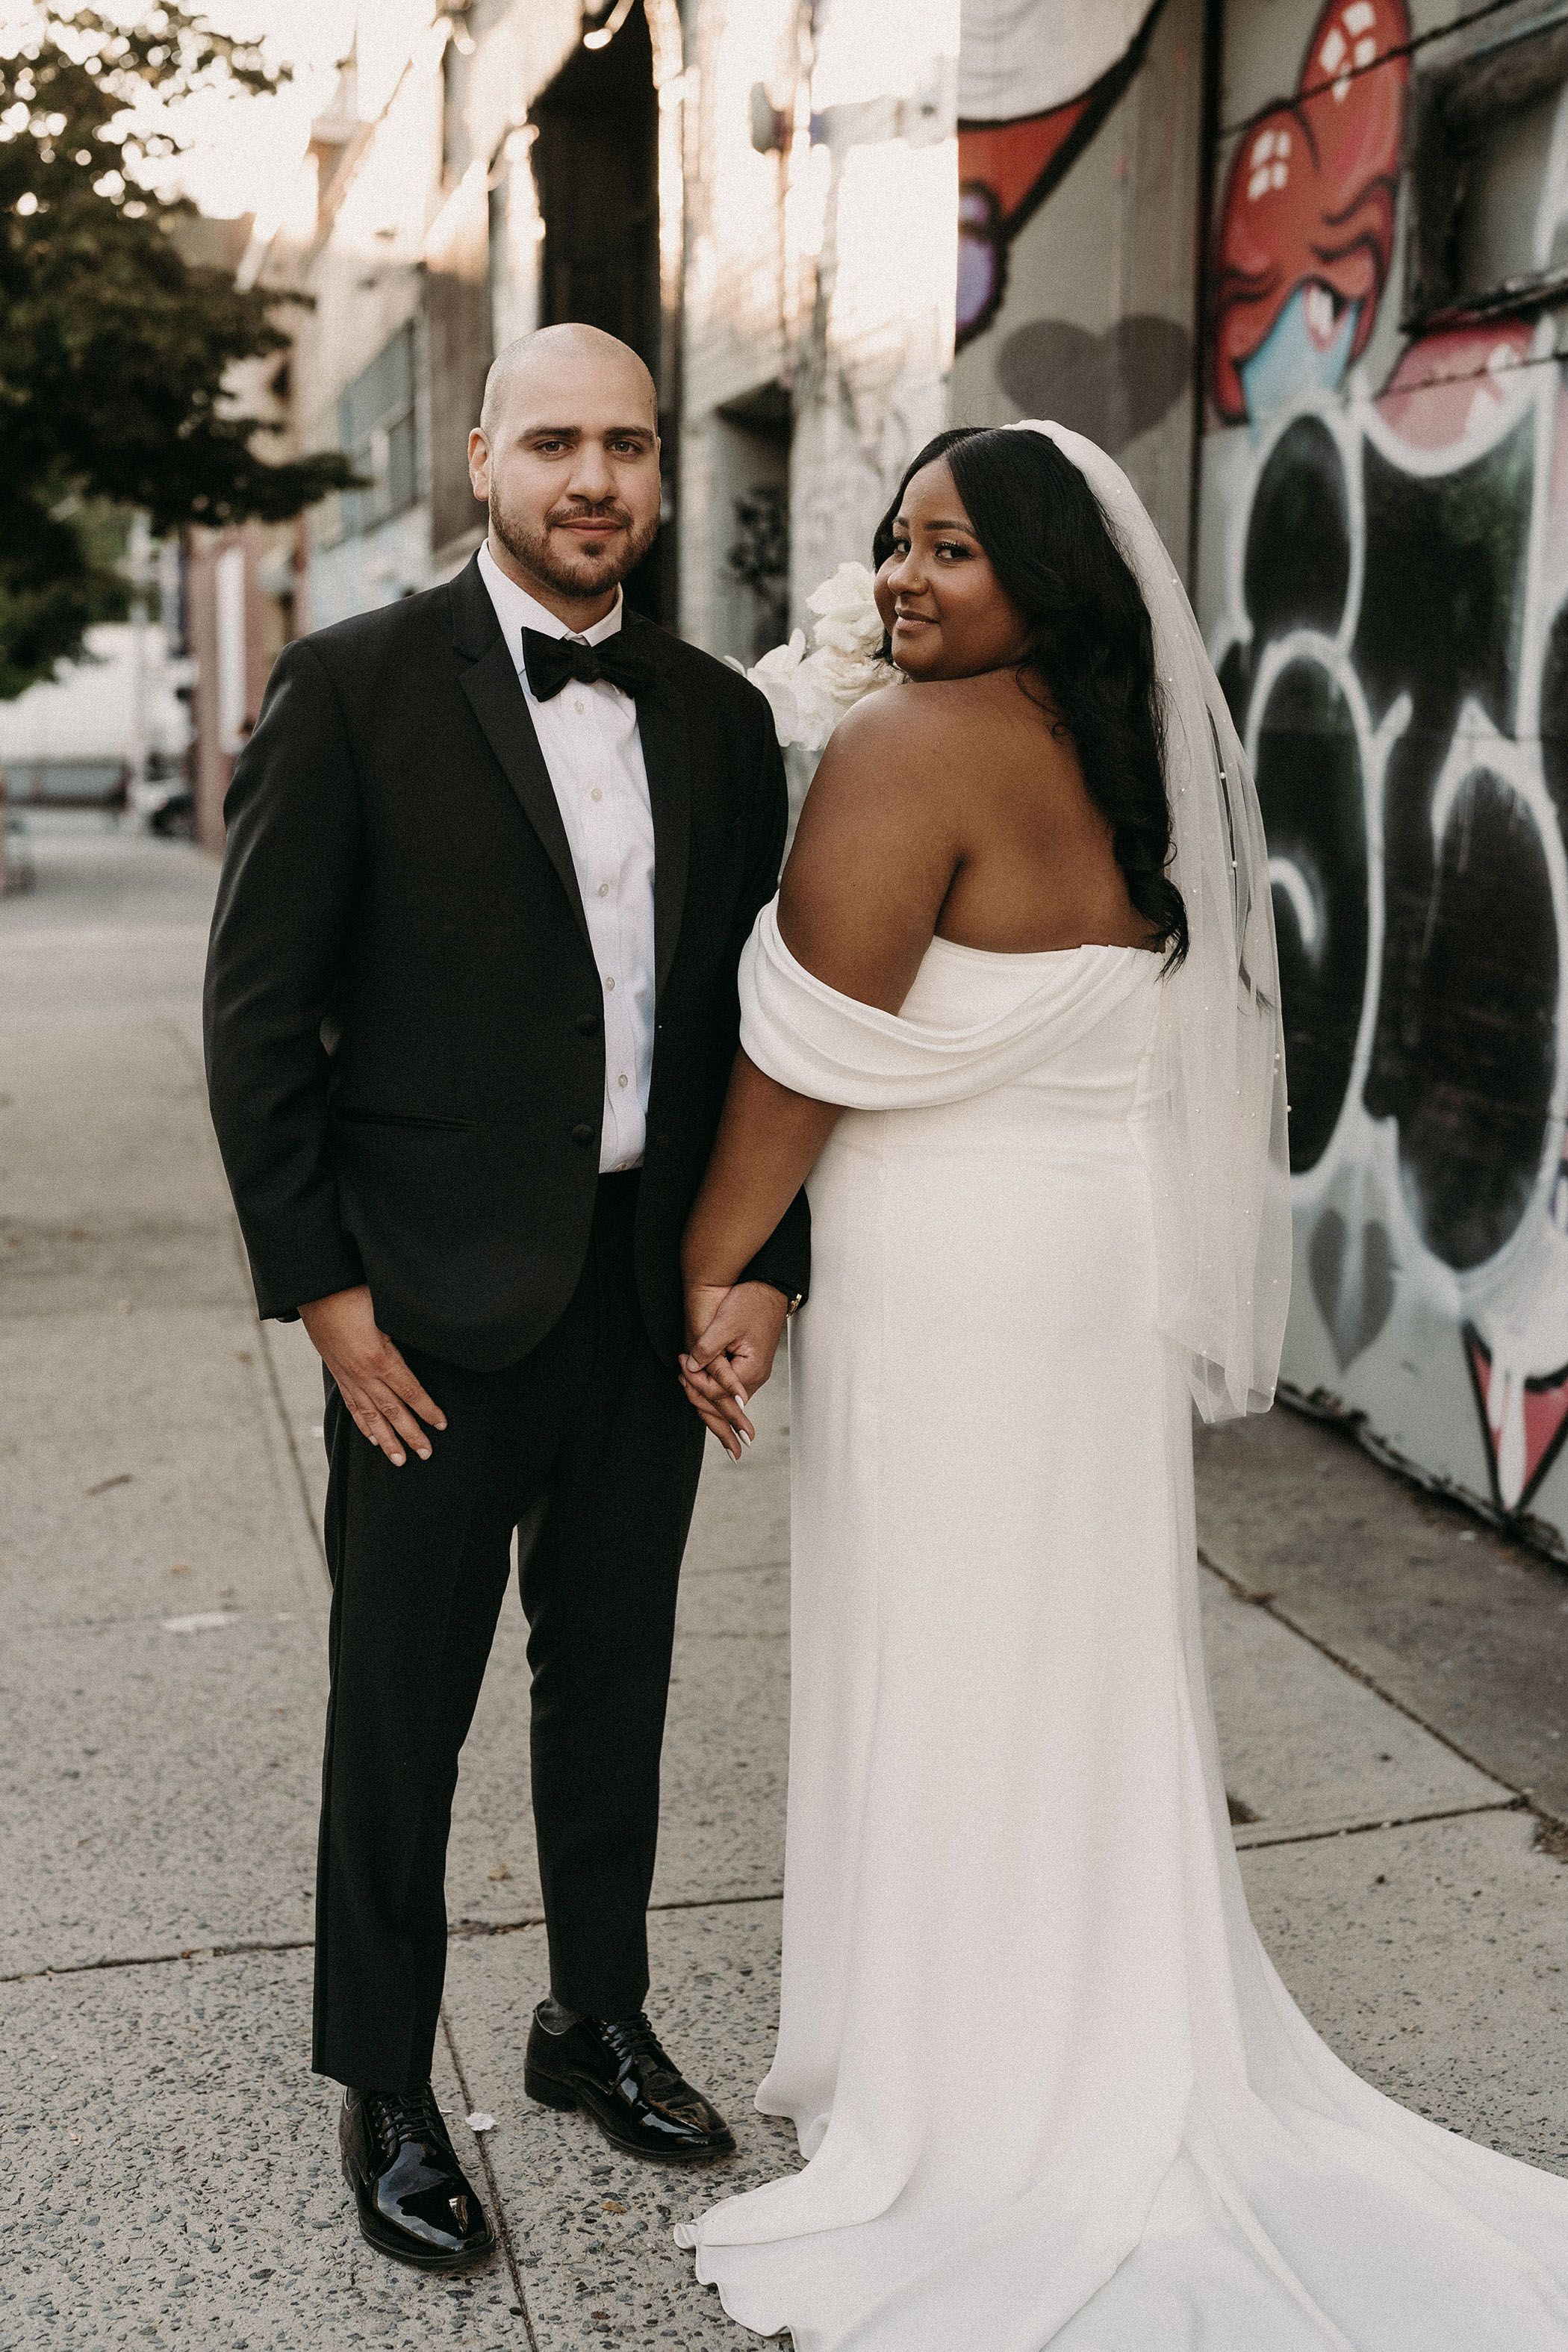 Unique and Playful Wedding in a Brooklyn, New York Movie Theatre